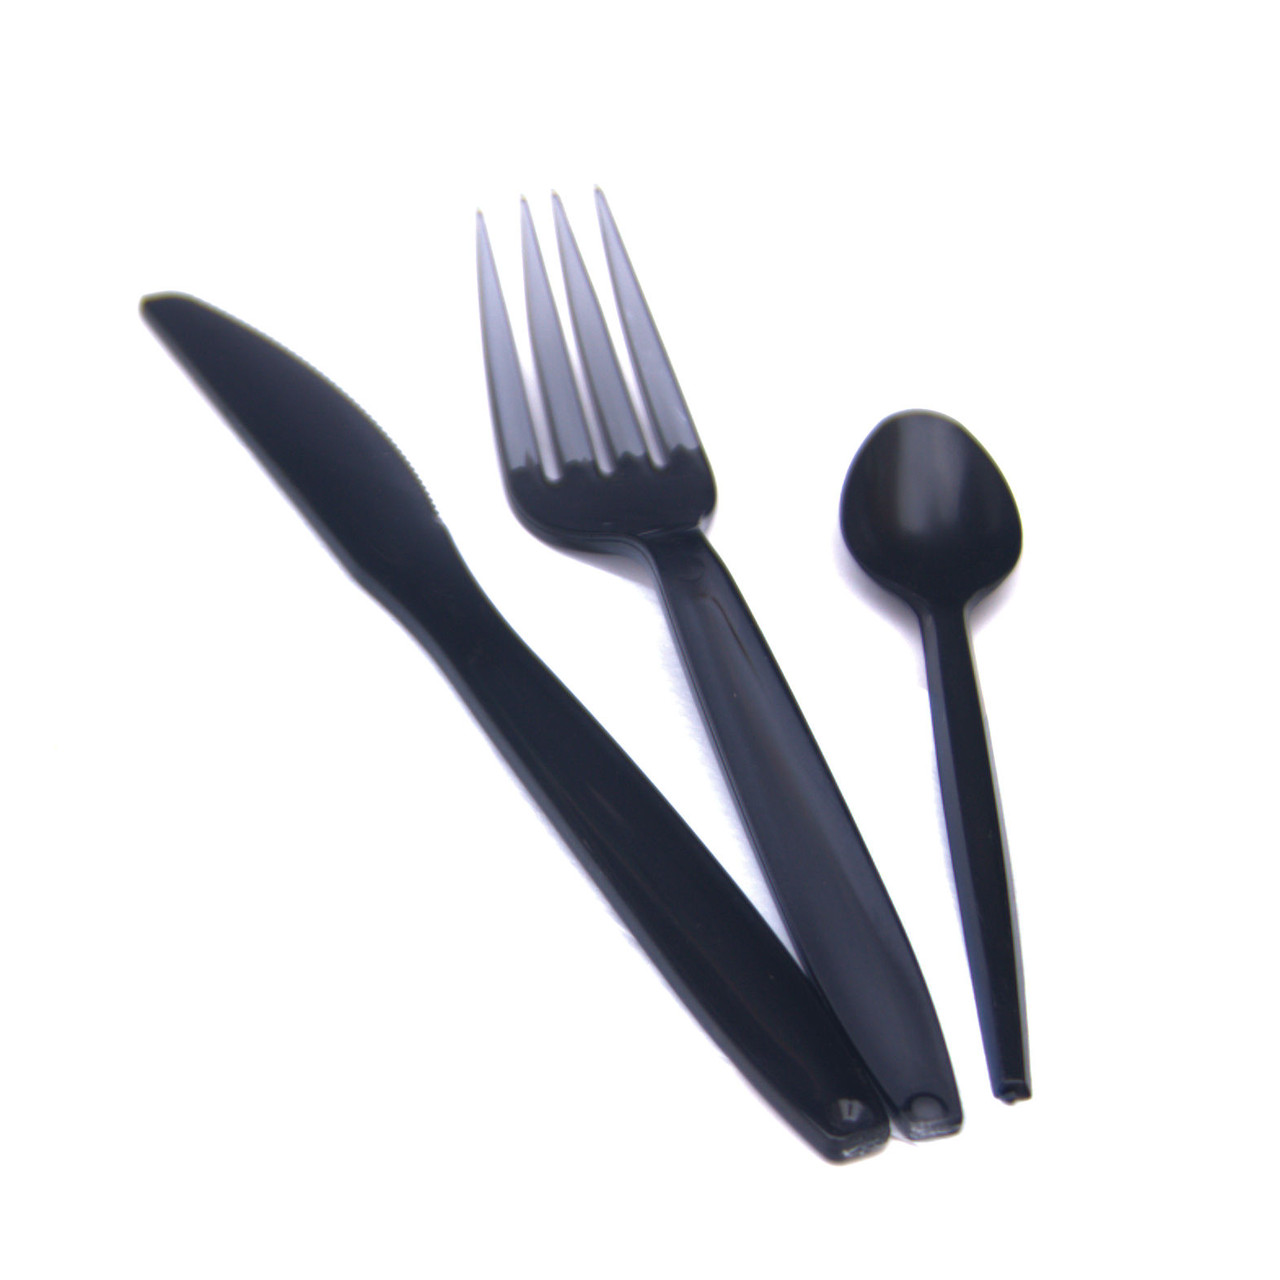 https://cdn11.bigcommerce.com/s-tjx0gy7pkp/images/stencil/1280x1280/products/15778/25656/cutlery_set_knife_fork_and_spoon__06200.1618049337.jpg?c=2